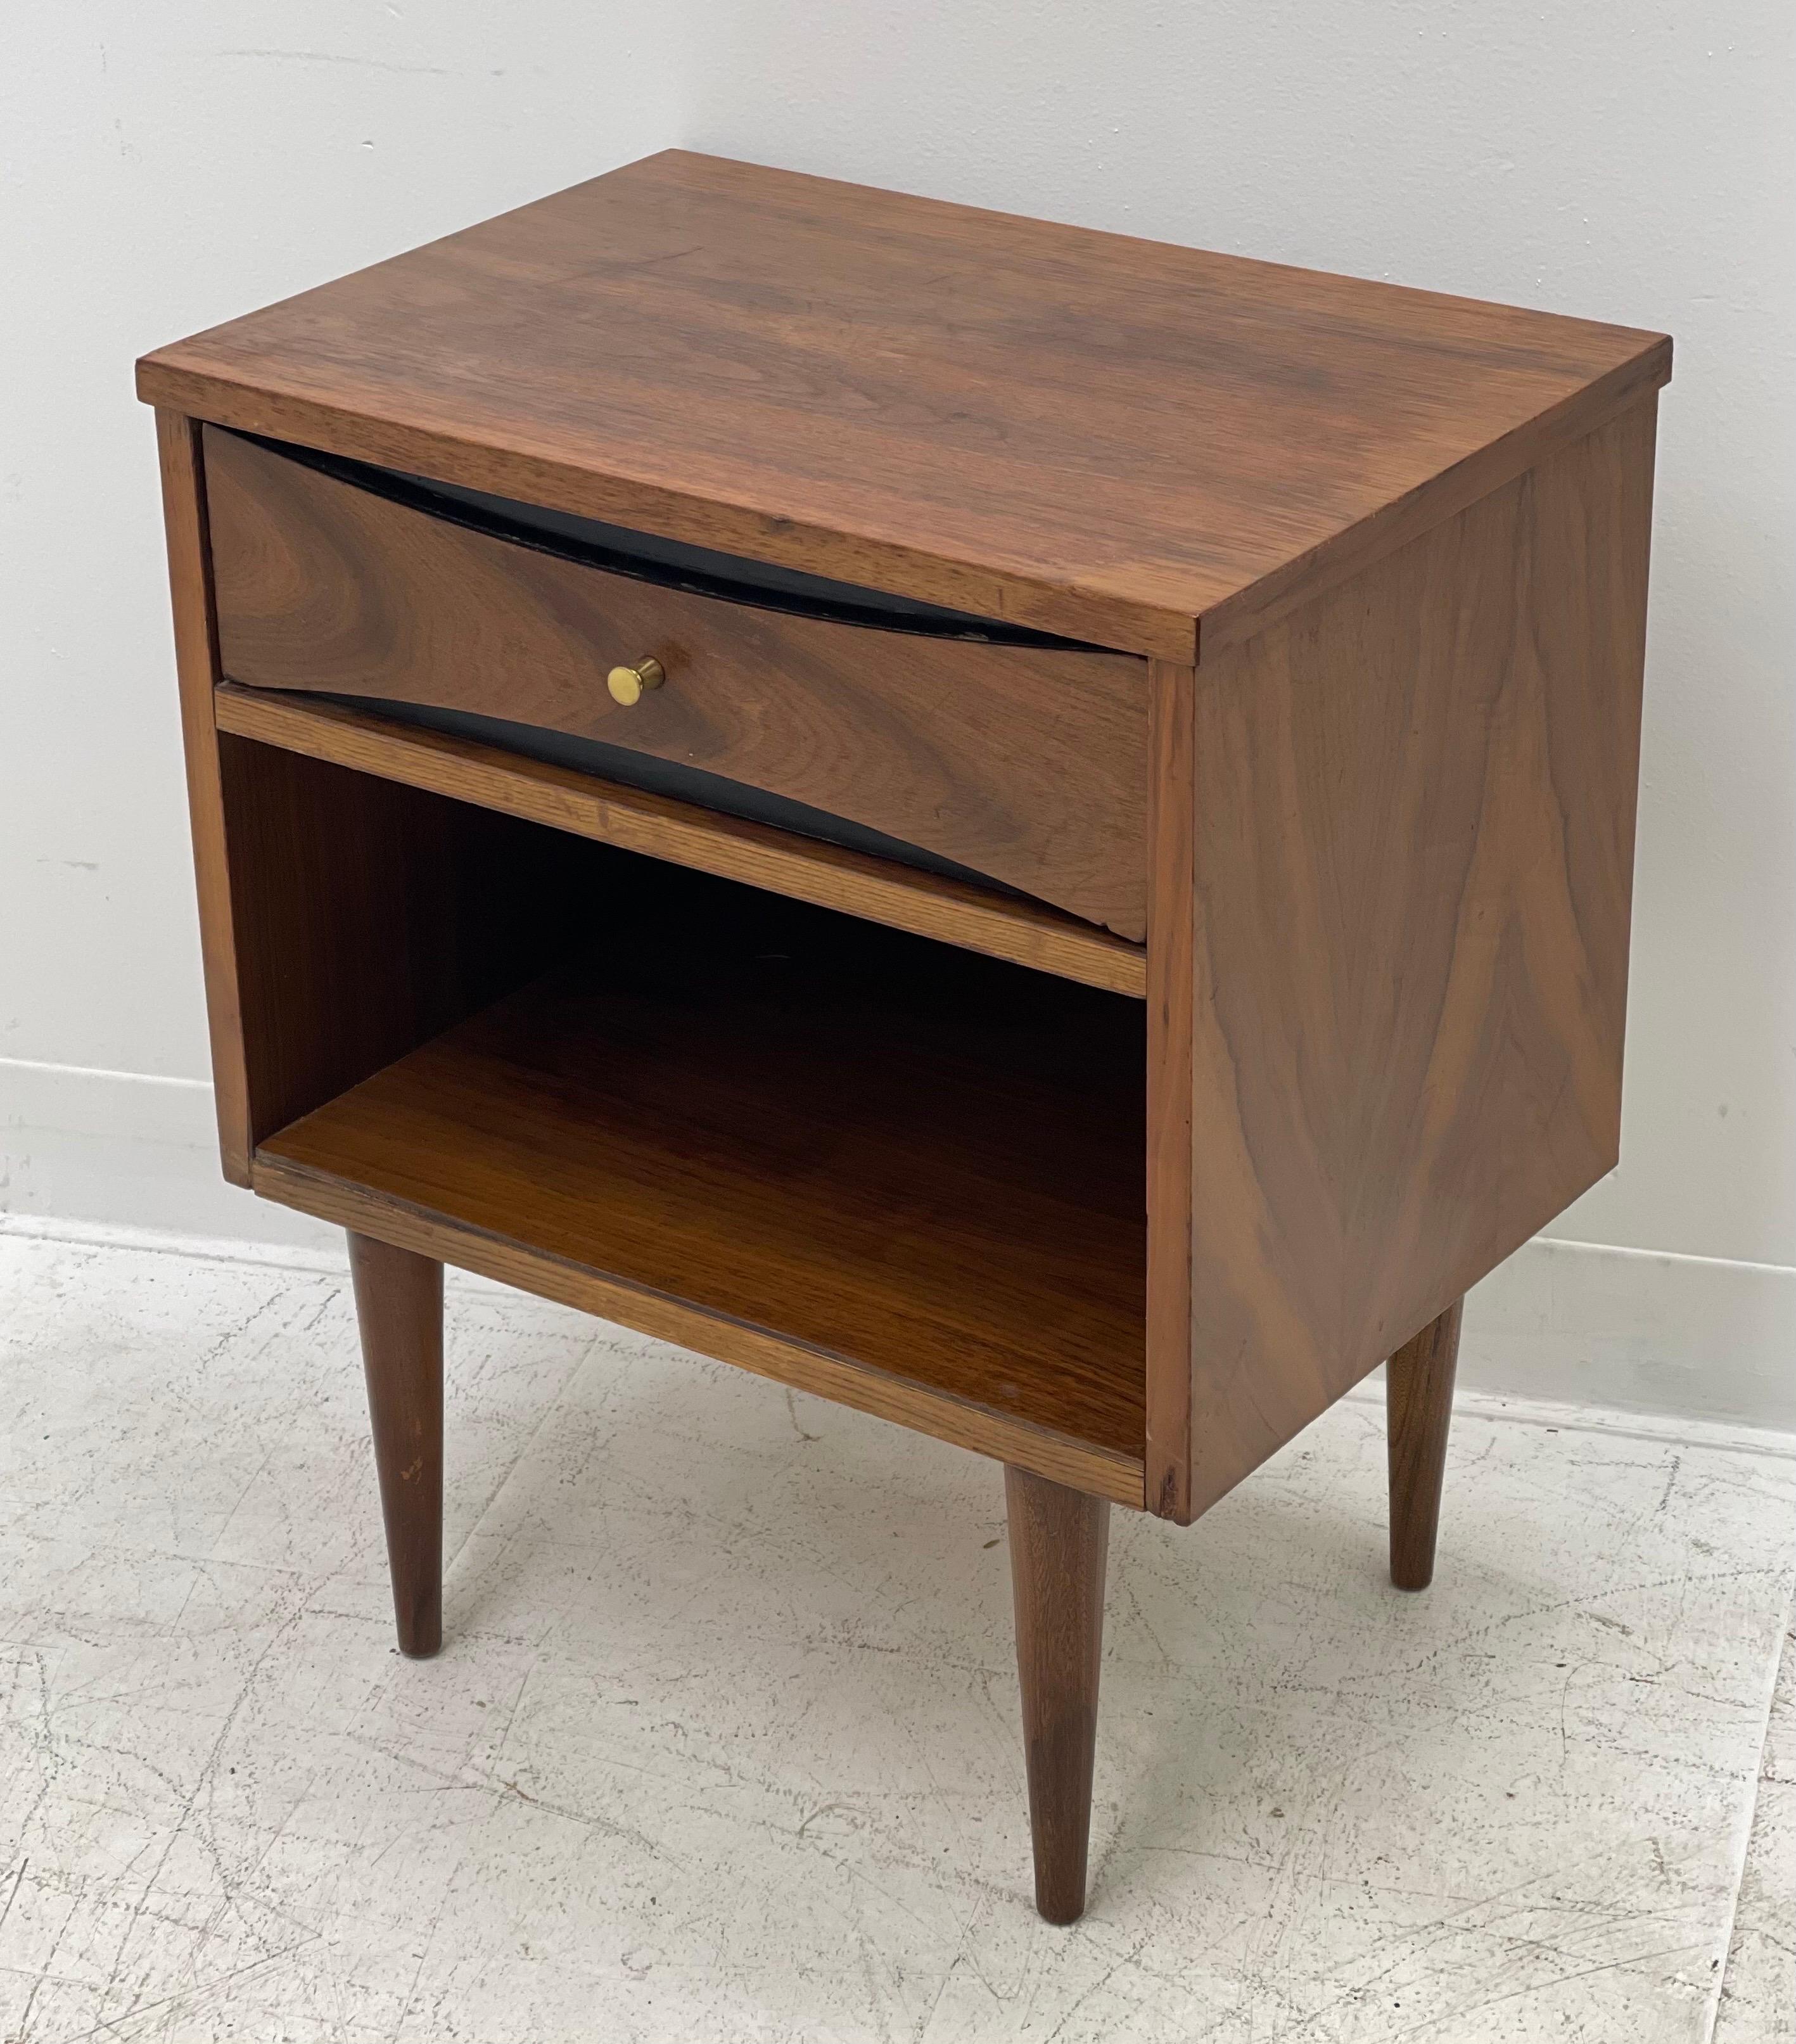 Vintage Mid-Century Modern End Table Dovetail Drawer In Good Condition For Sale In Seattle, WA